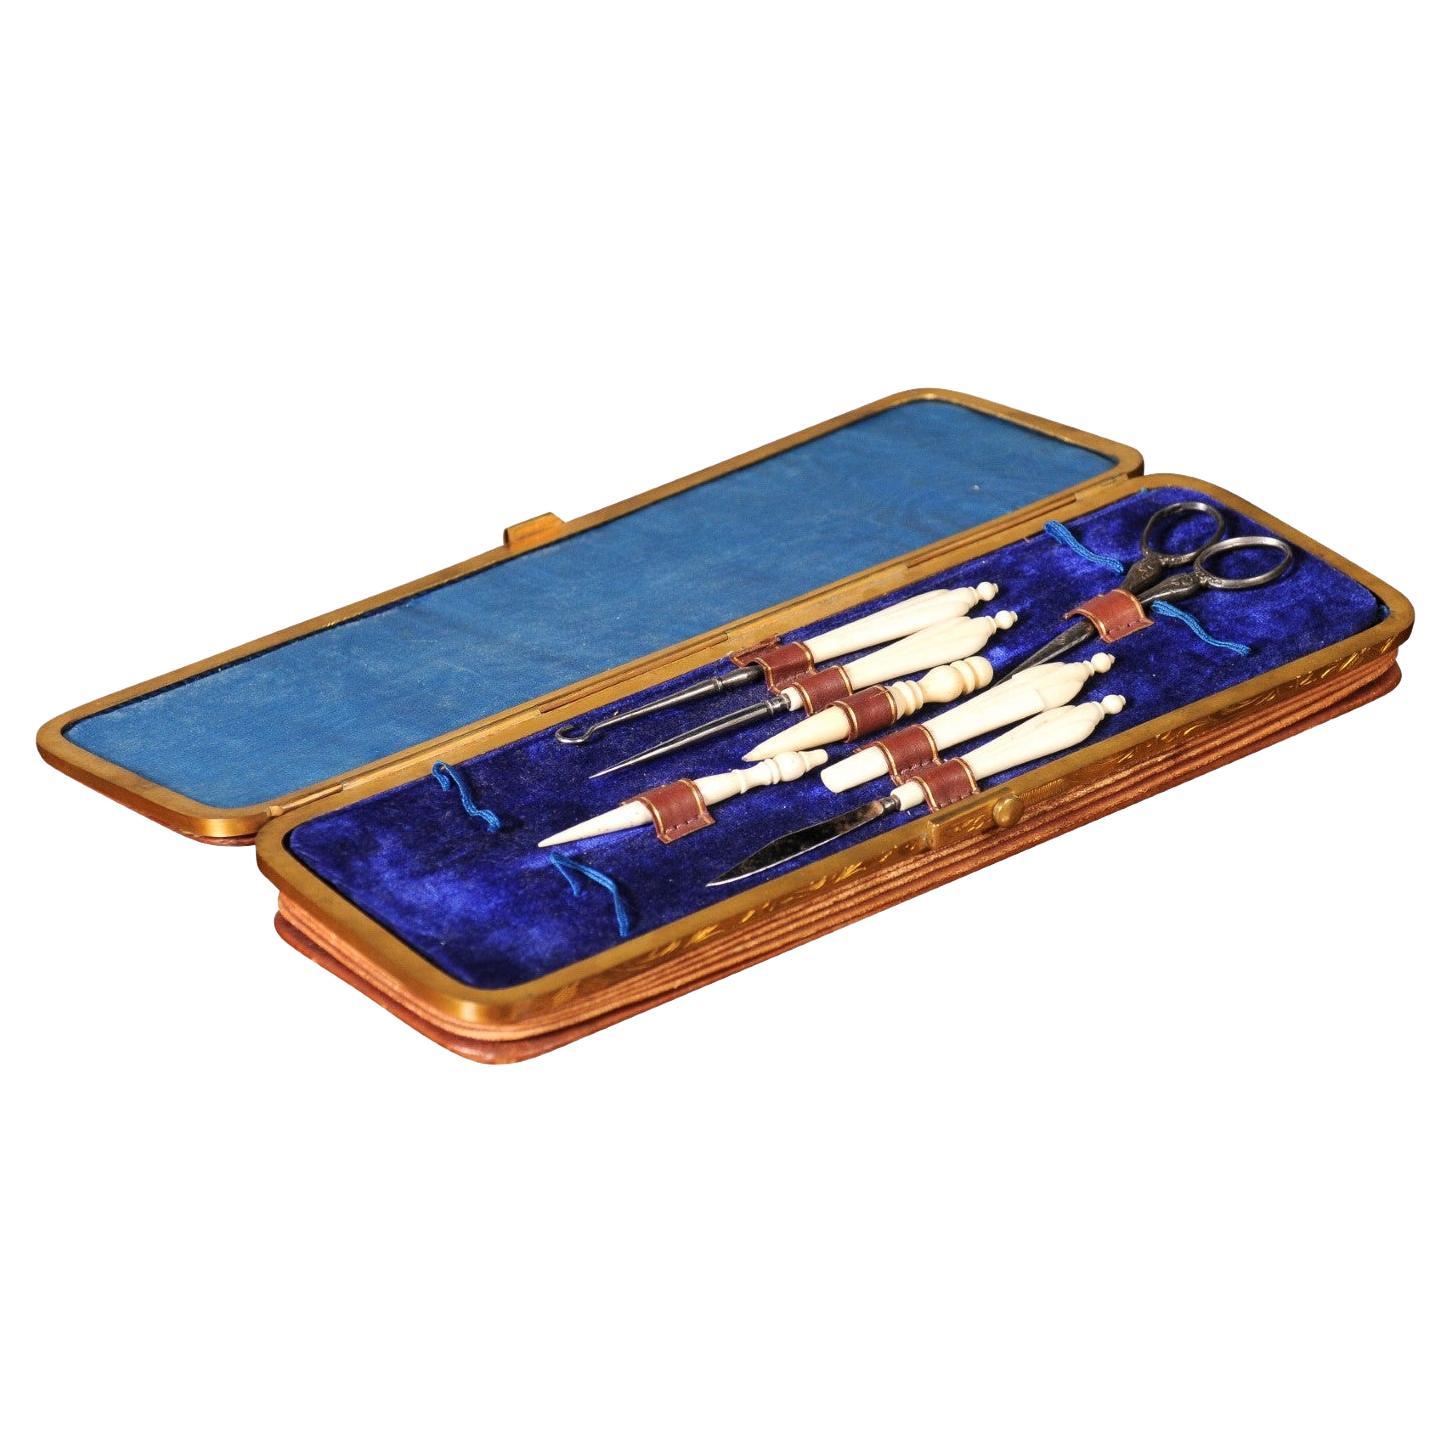 French Napoleon III Period 19th Century Leather Sewing Kit with Bronze Hardware For Sale